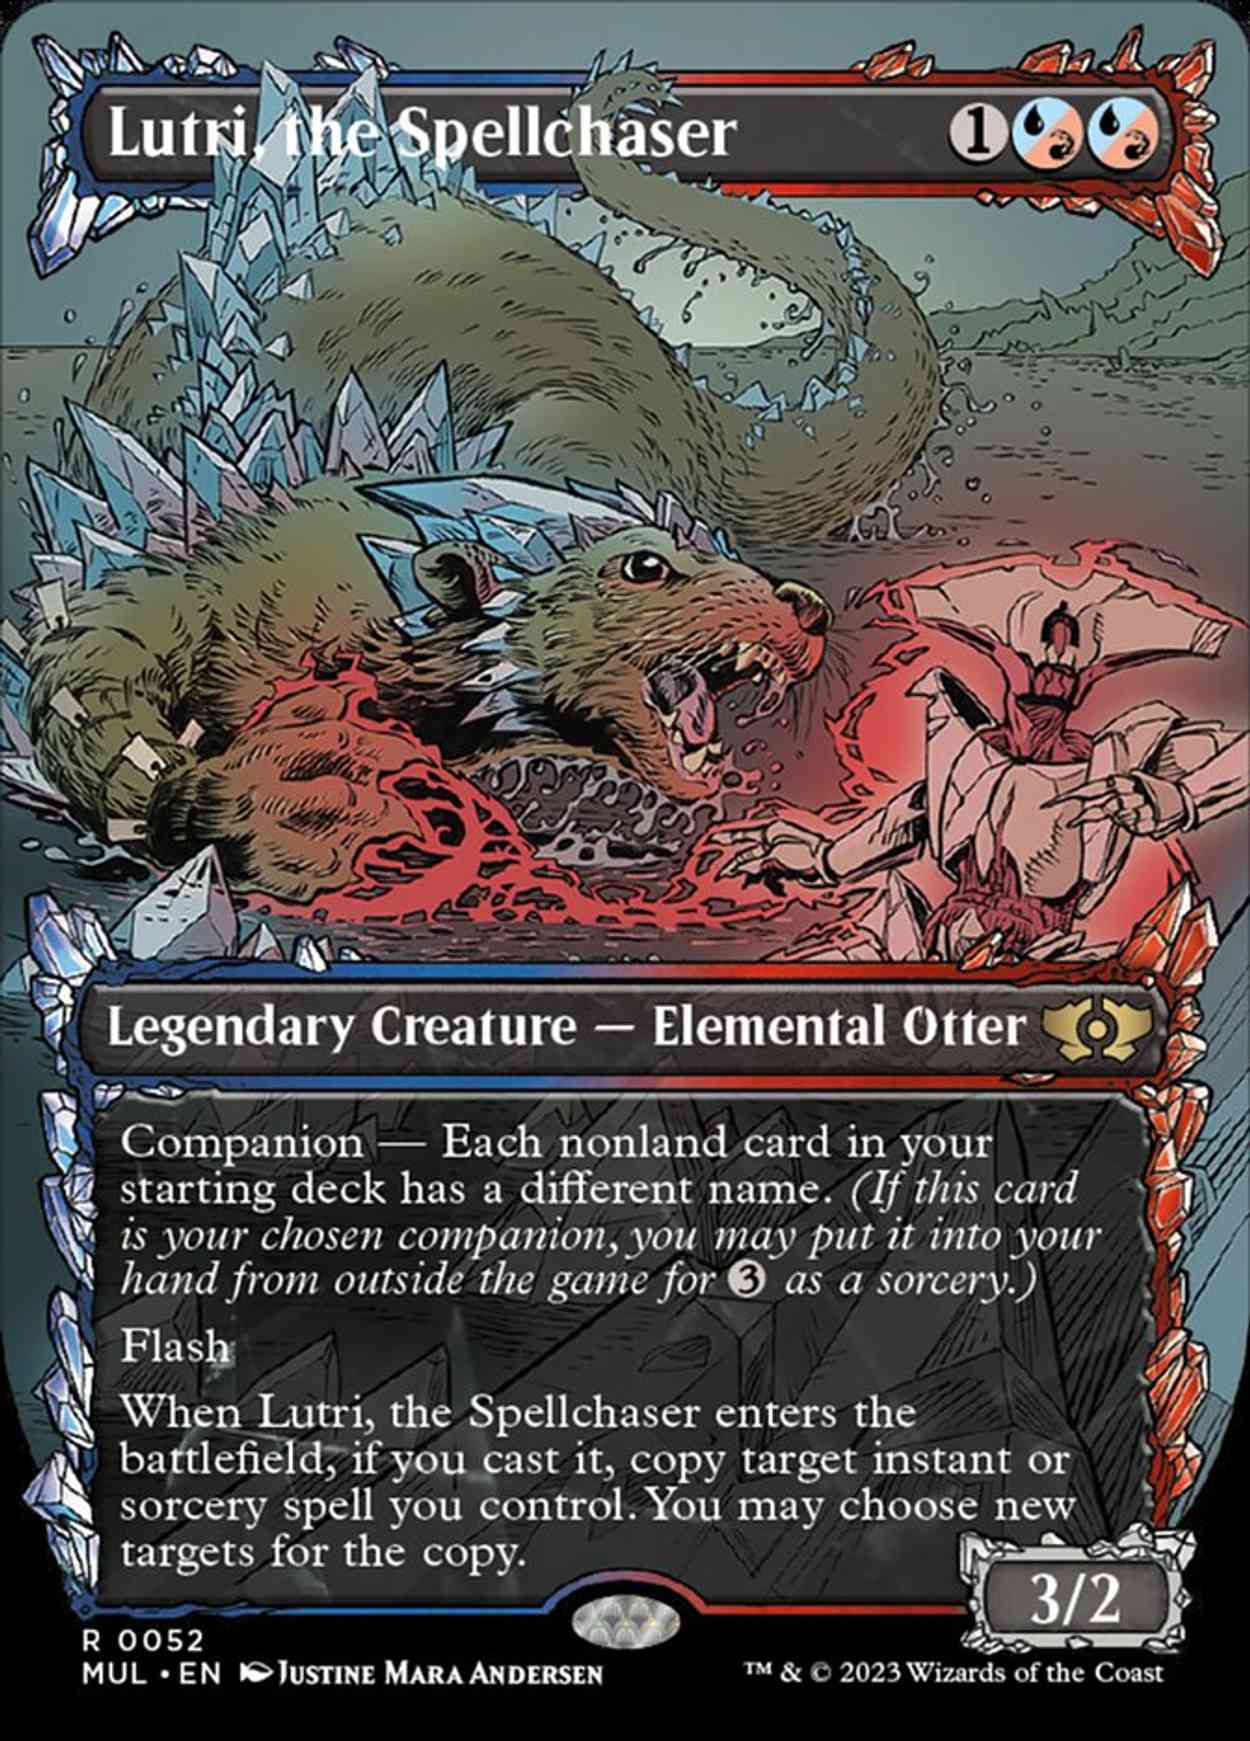 Lutri, the Spellchaser magic card front